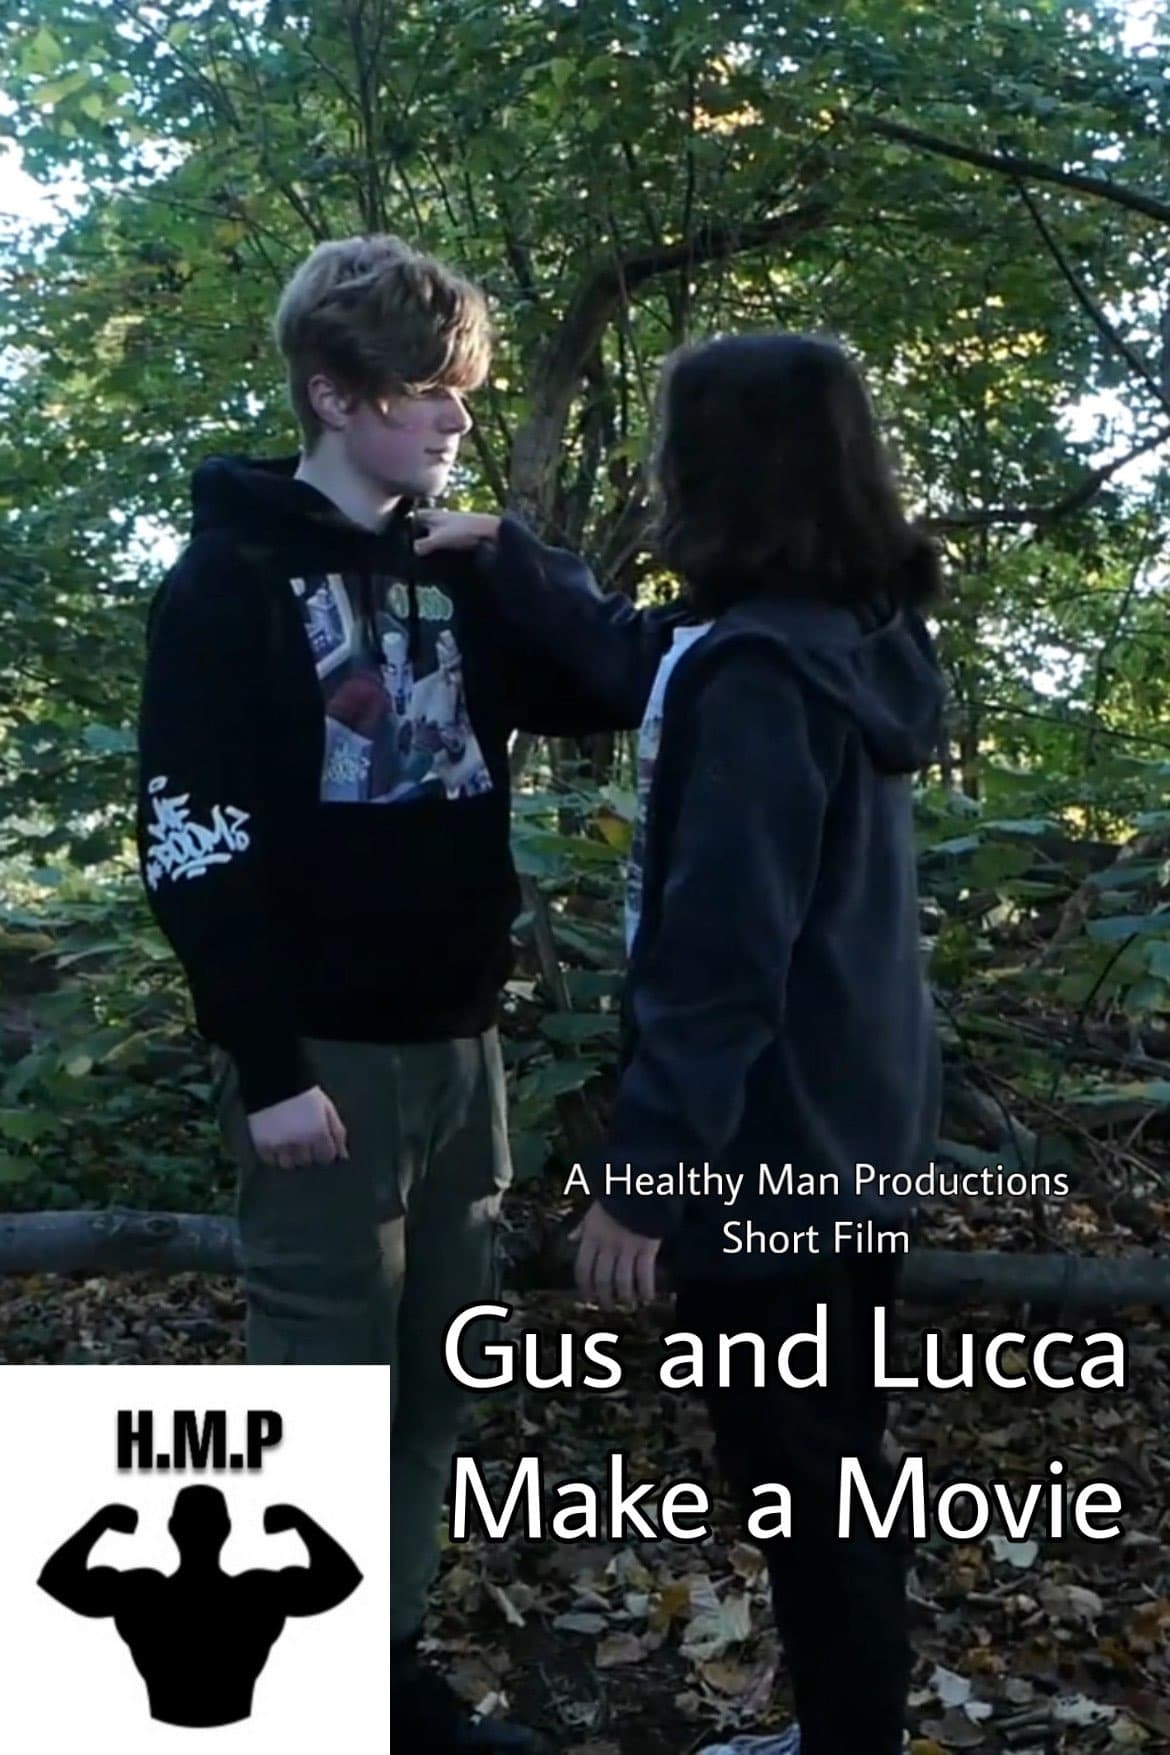 Gus and Lucca Make a Movie